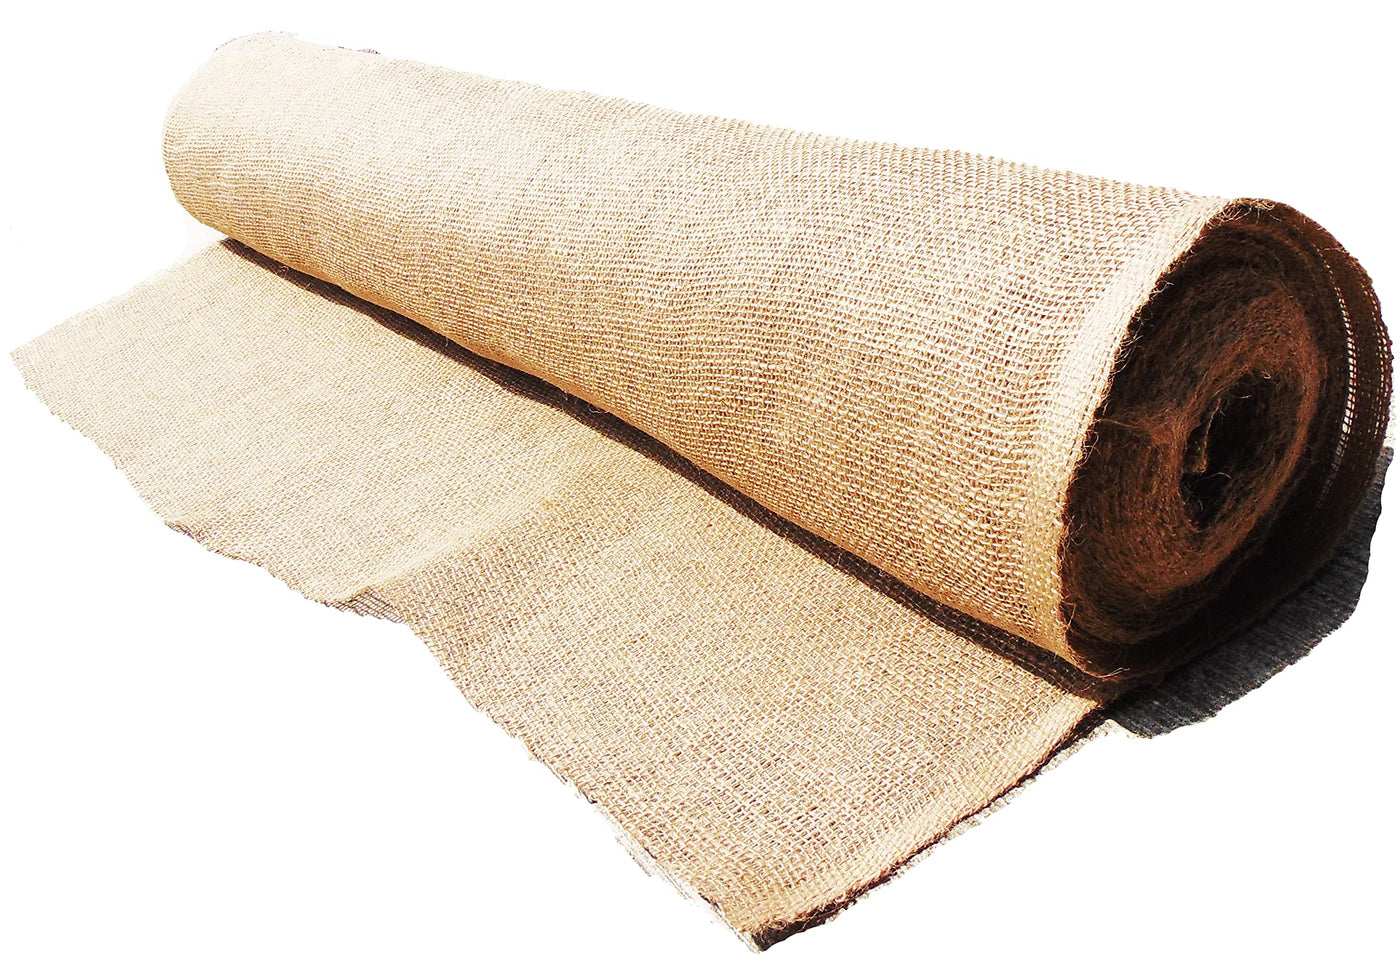 AAYU 40" Wide Light Weight Burlap Fabric roll 150 -Ft Long, Lose Weaved Garden Netting, Edging, Erosion Control & Weed Barrier